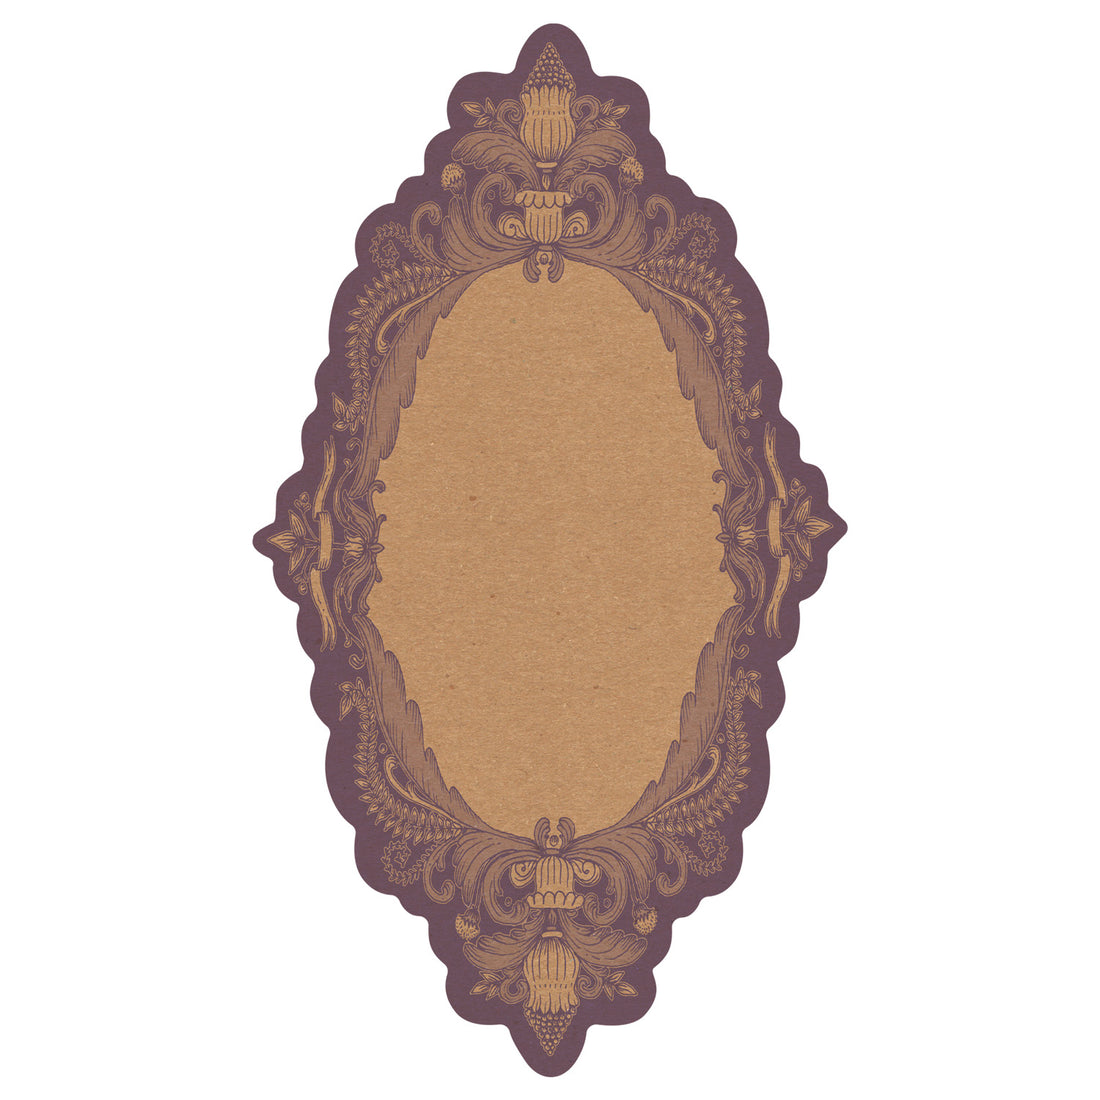 A die-cut, scalloped kraft paper table accent with an ornate, French toile-style design in purple around the edges.